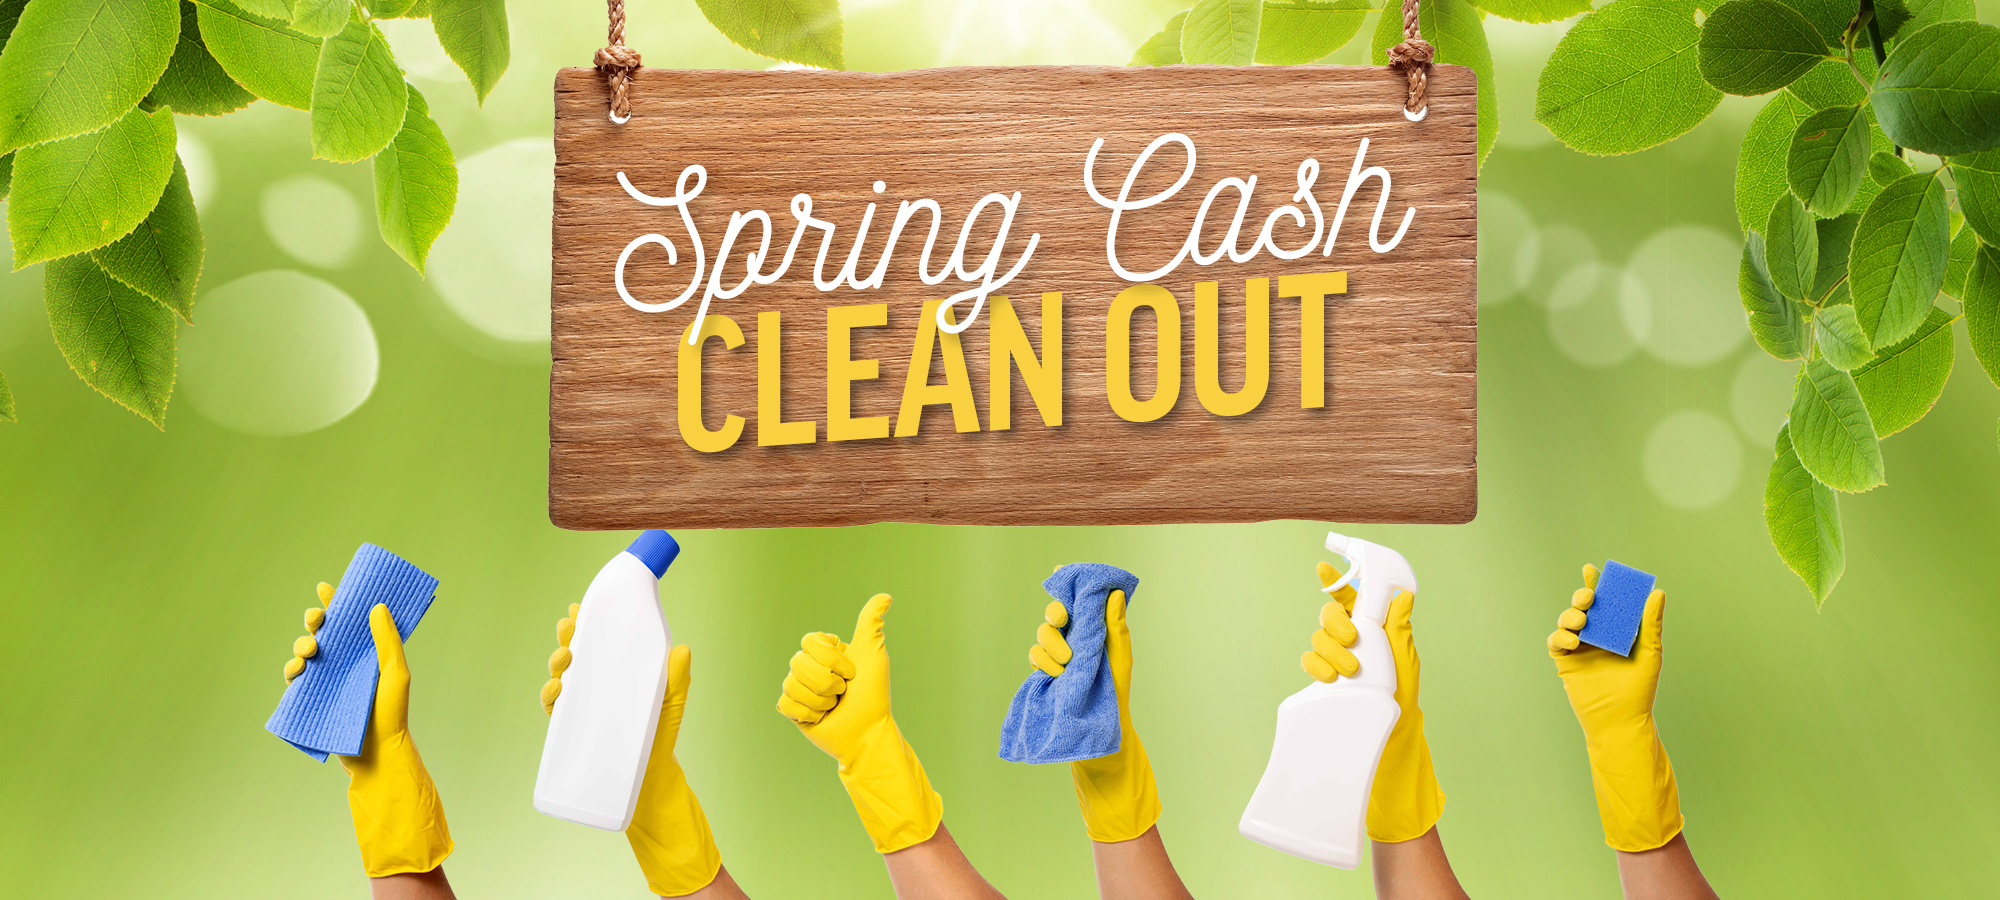 Spring Cash Clean Out